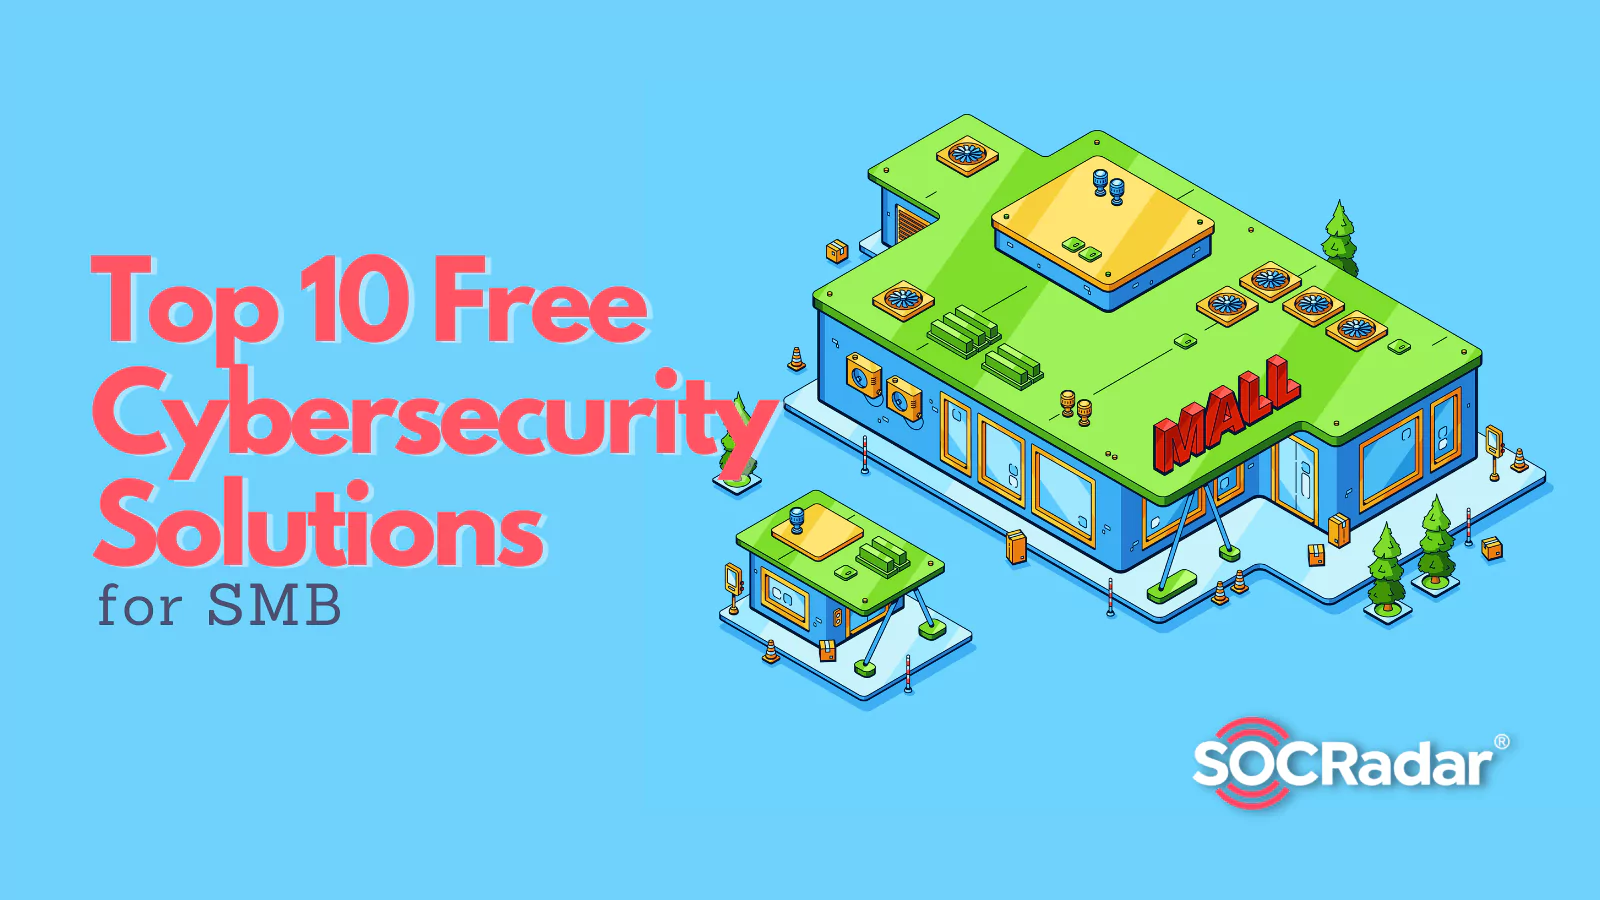 Top 10 Free Cybersecurity Solutions for SMB - SOCRadar® Cyber